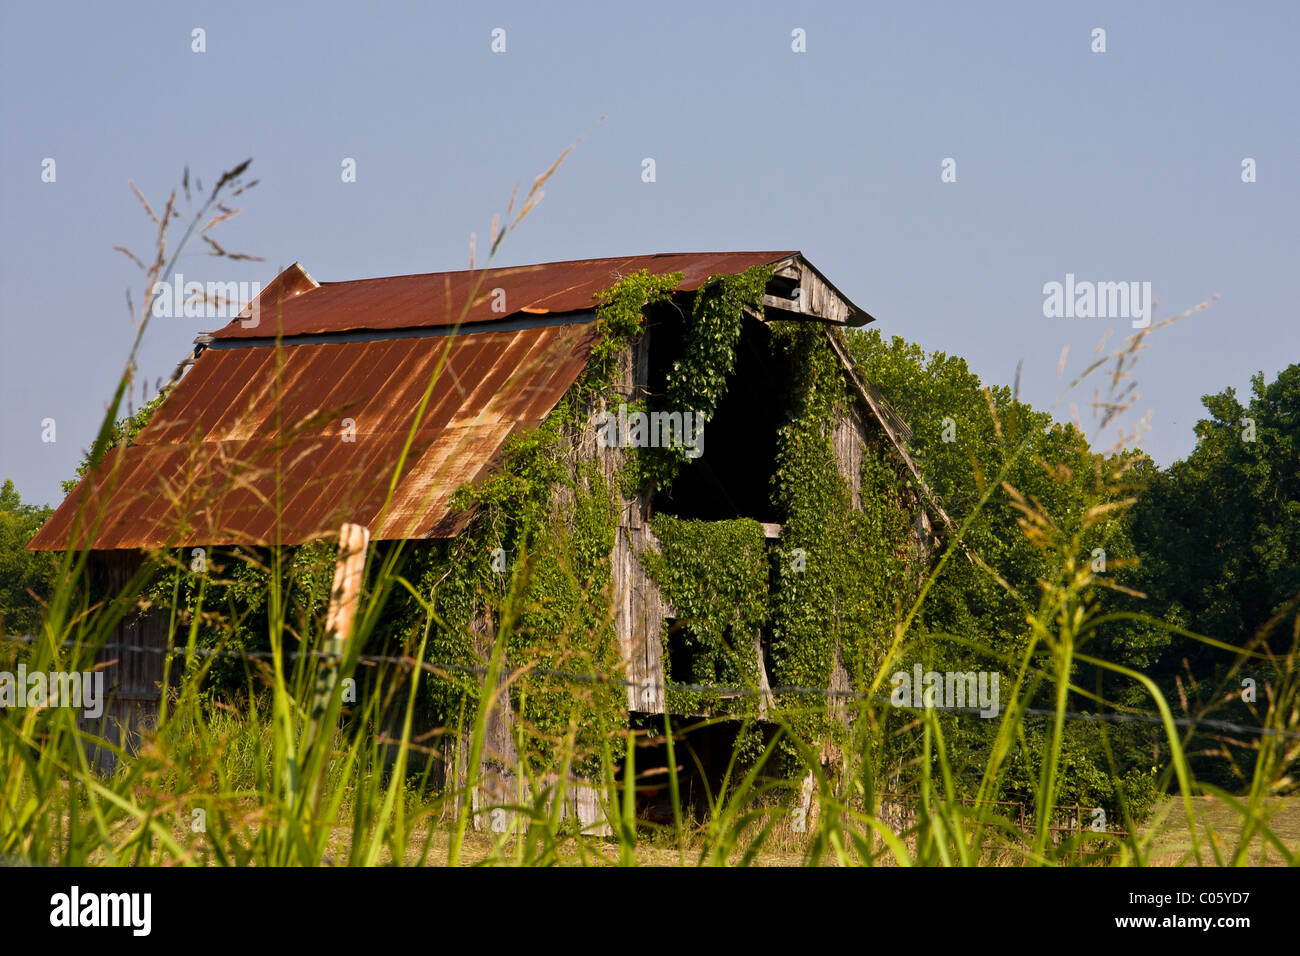 Barn, overgrown with ivy, in rural Arkansas north of Hot Springs. Stock Photo